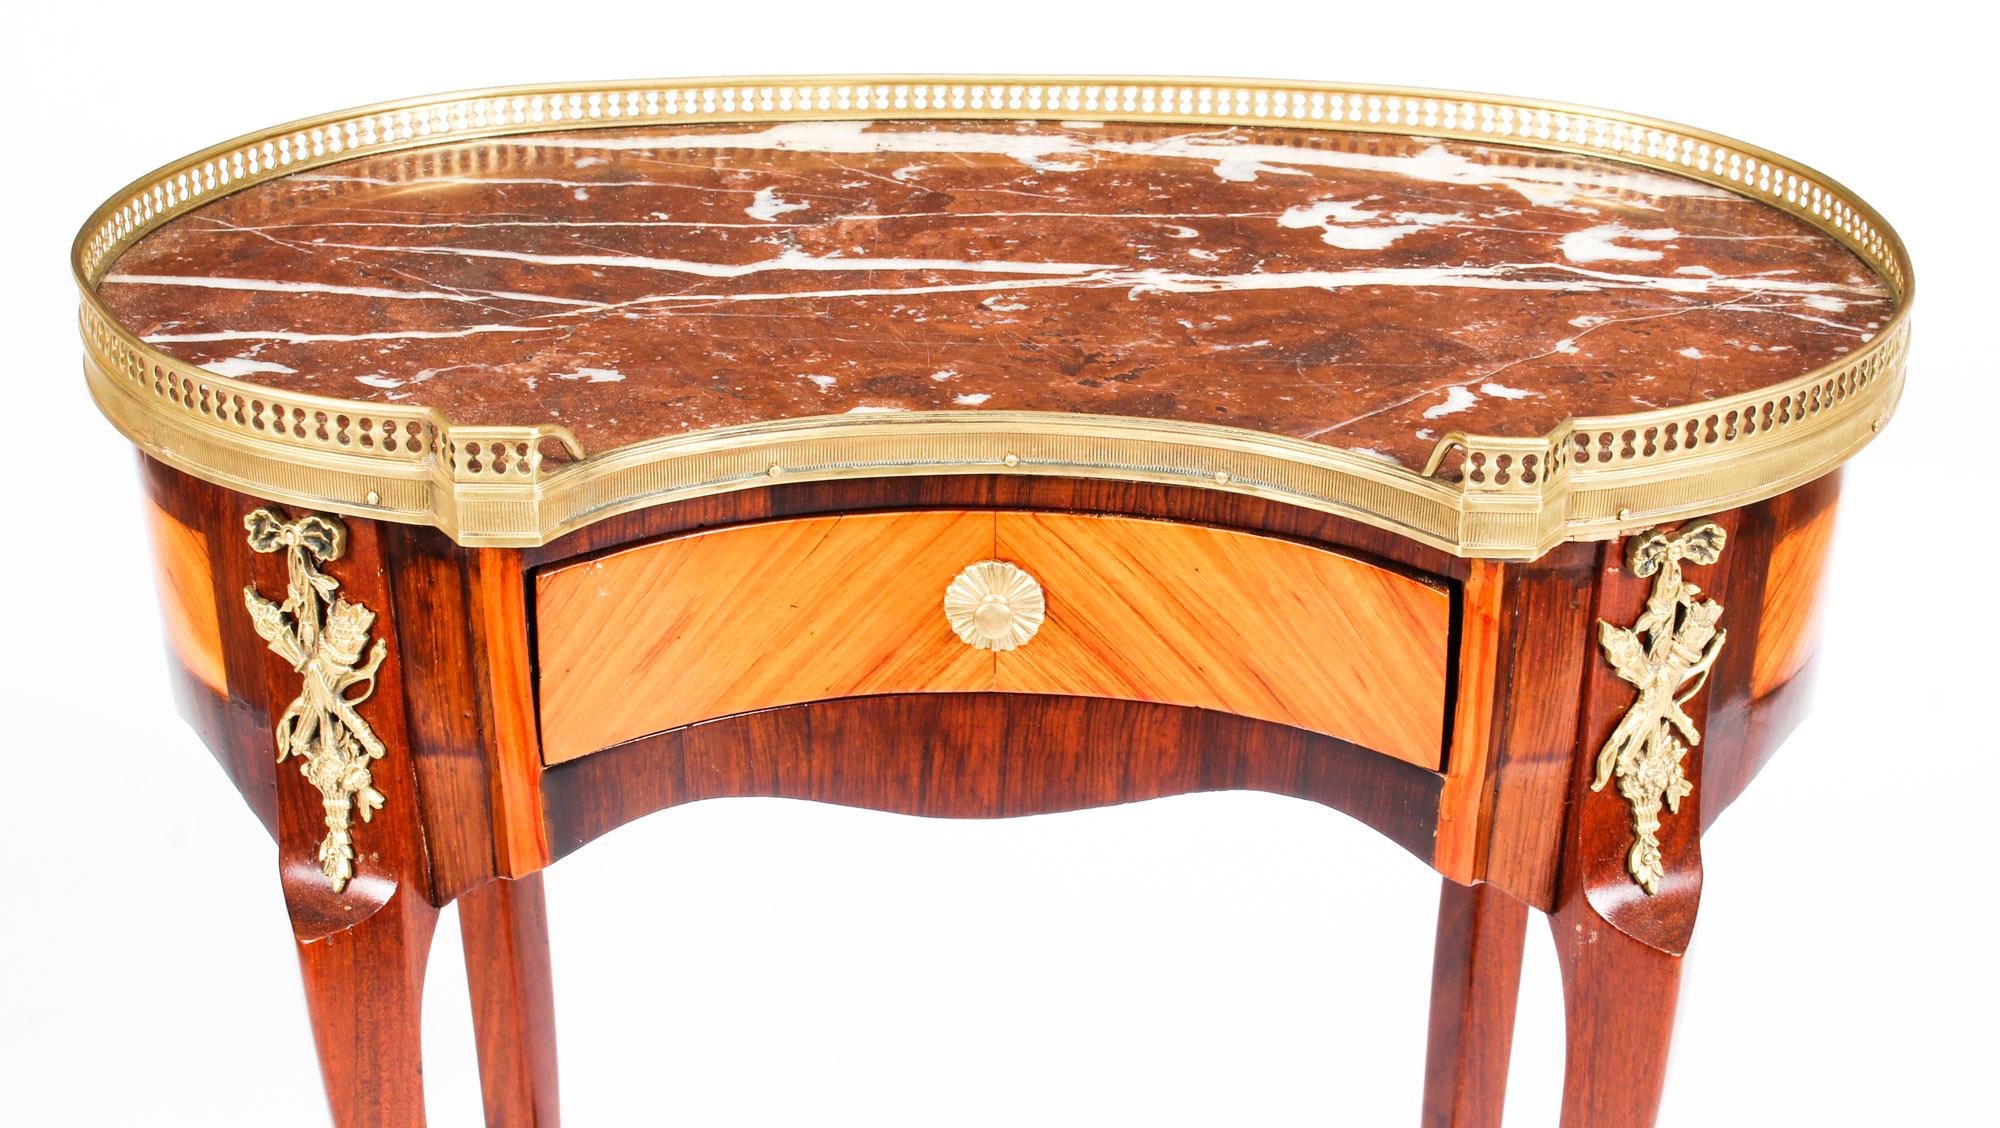 This is a splendid antique French kingwood and satinwood kidney-shaped side table with pierced gallery back above a marble top, circa 1860 in date.

This delightful side table has been masterfully crafted from beautiful kingwood and features a